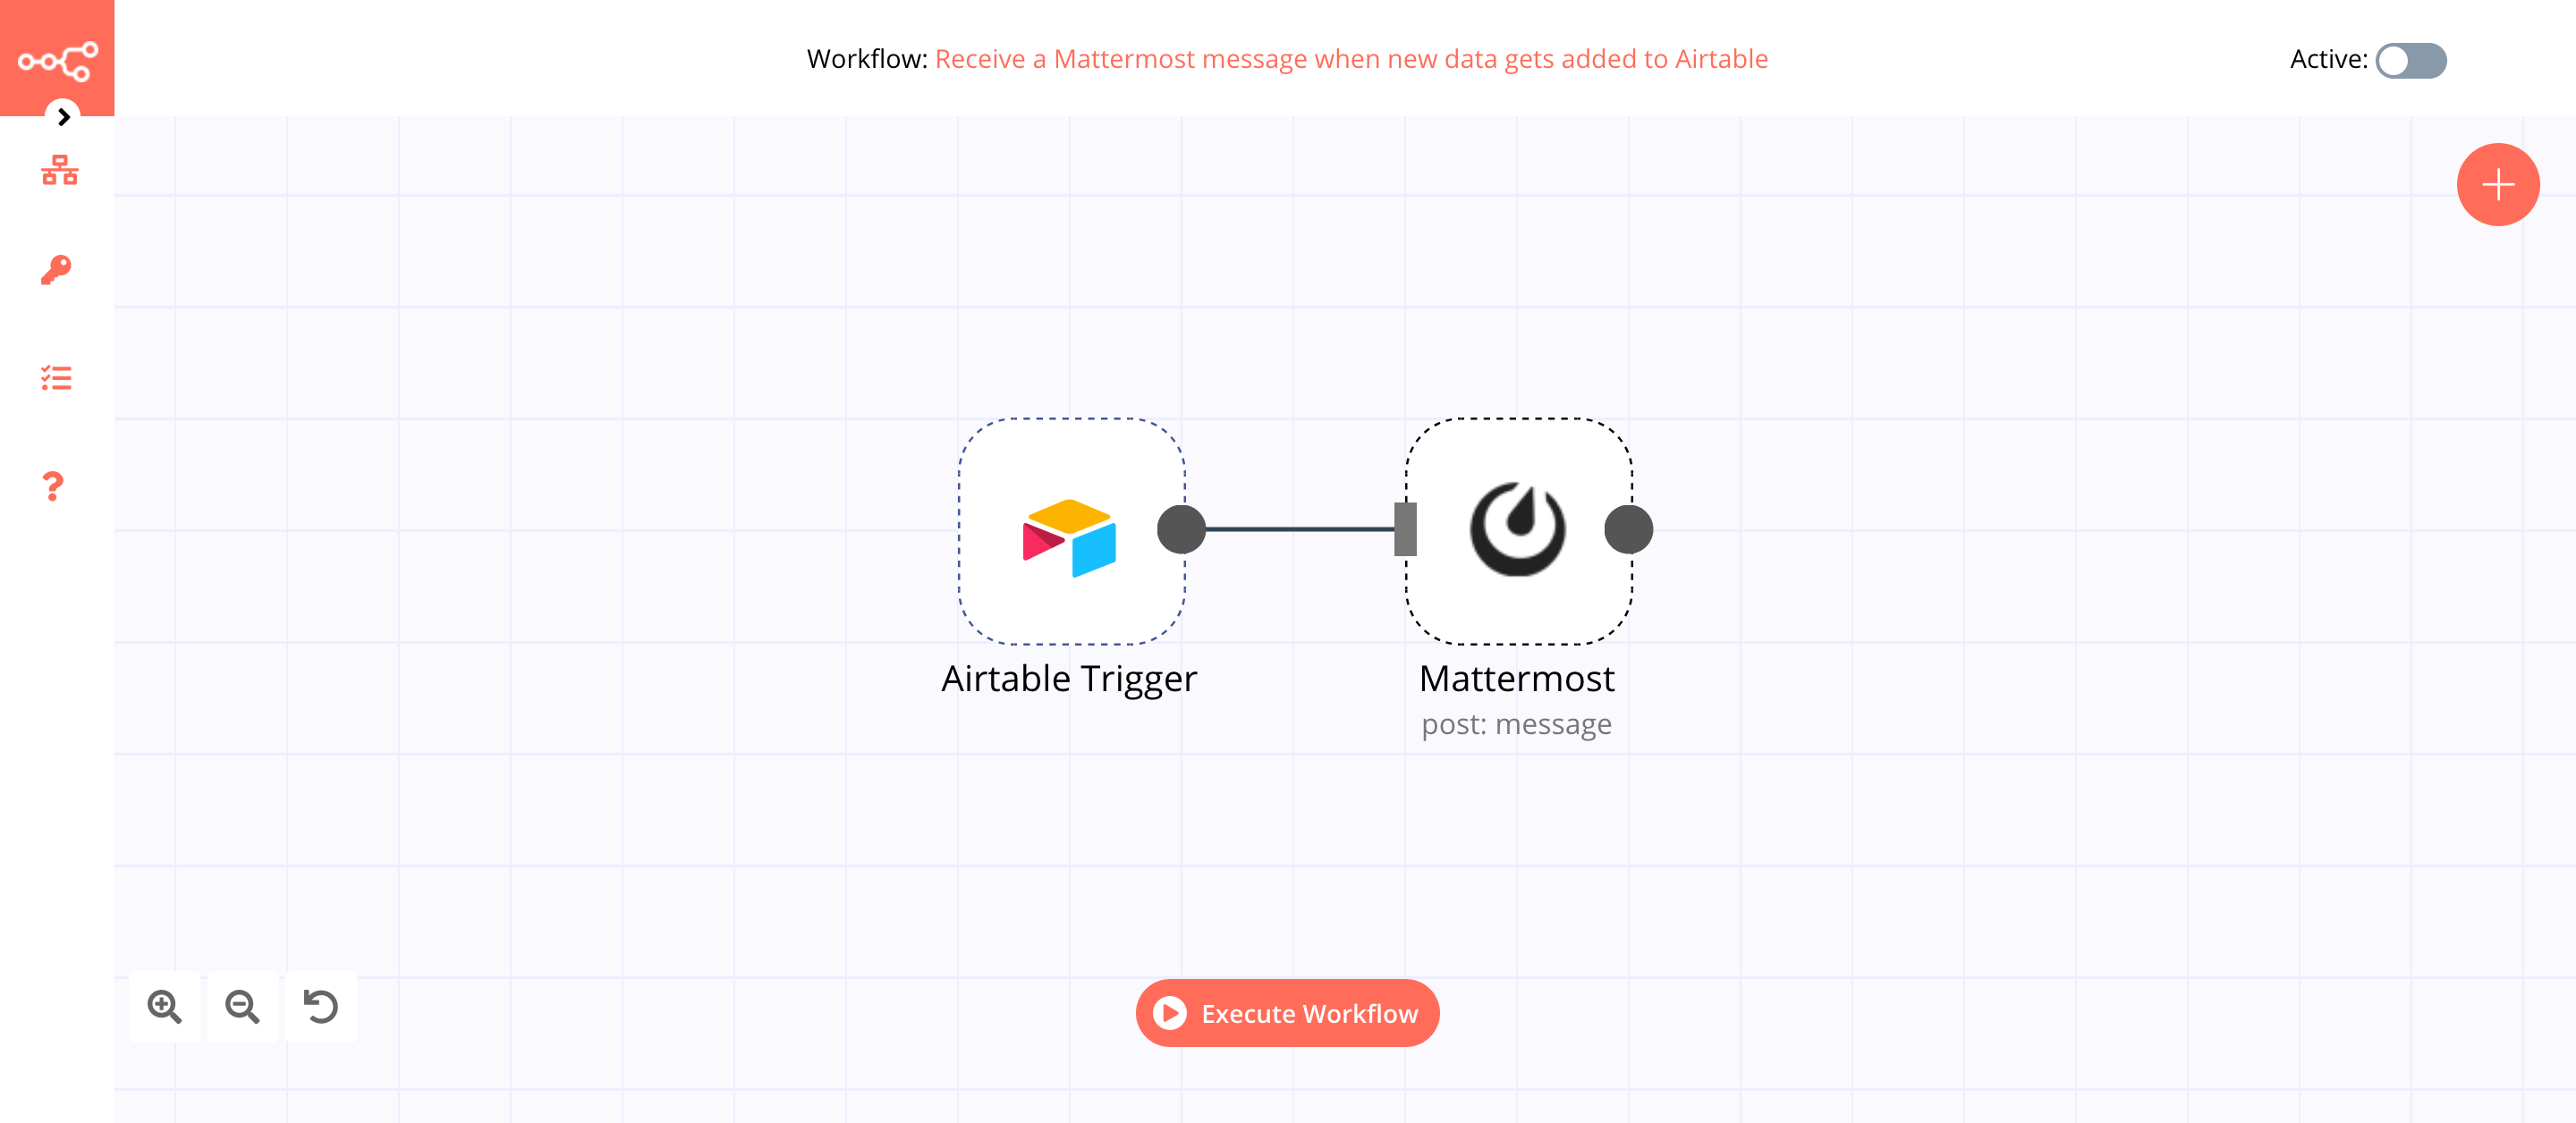 A workflow with the Airtable Trigger node